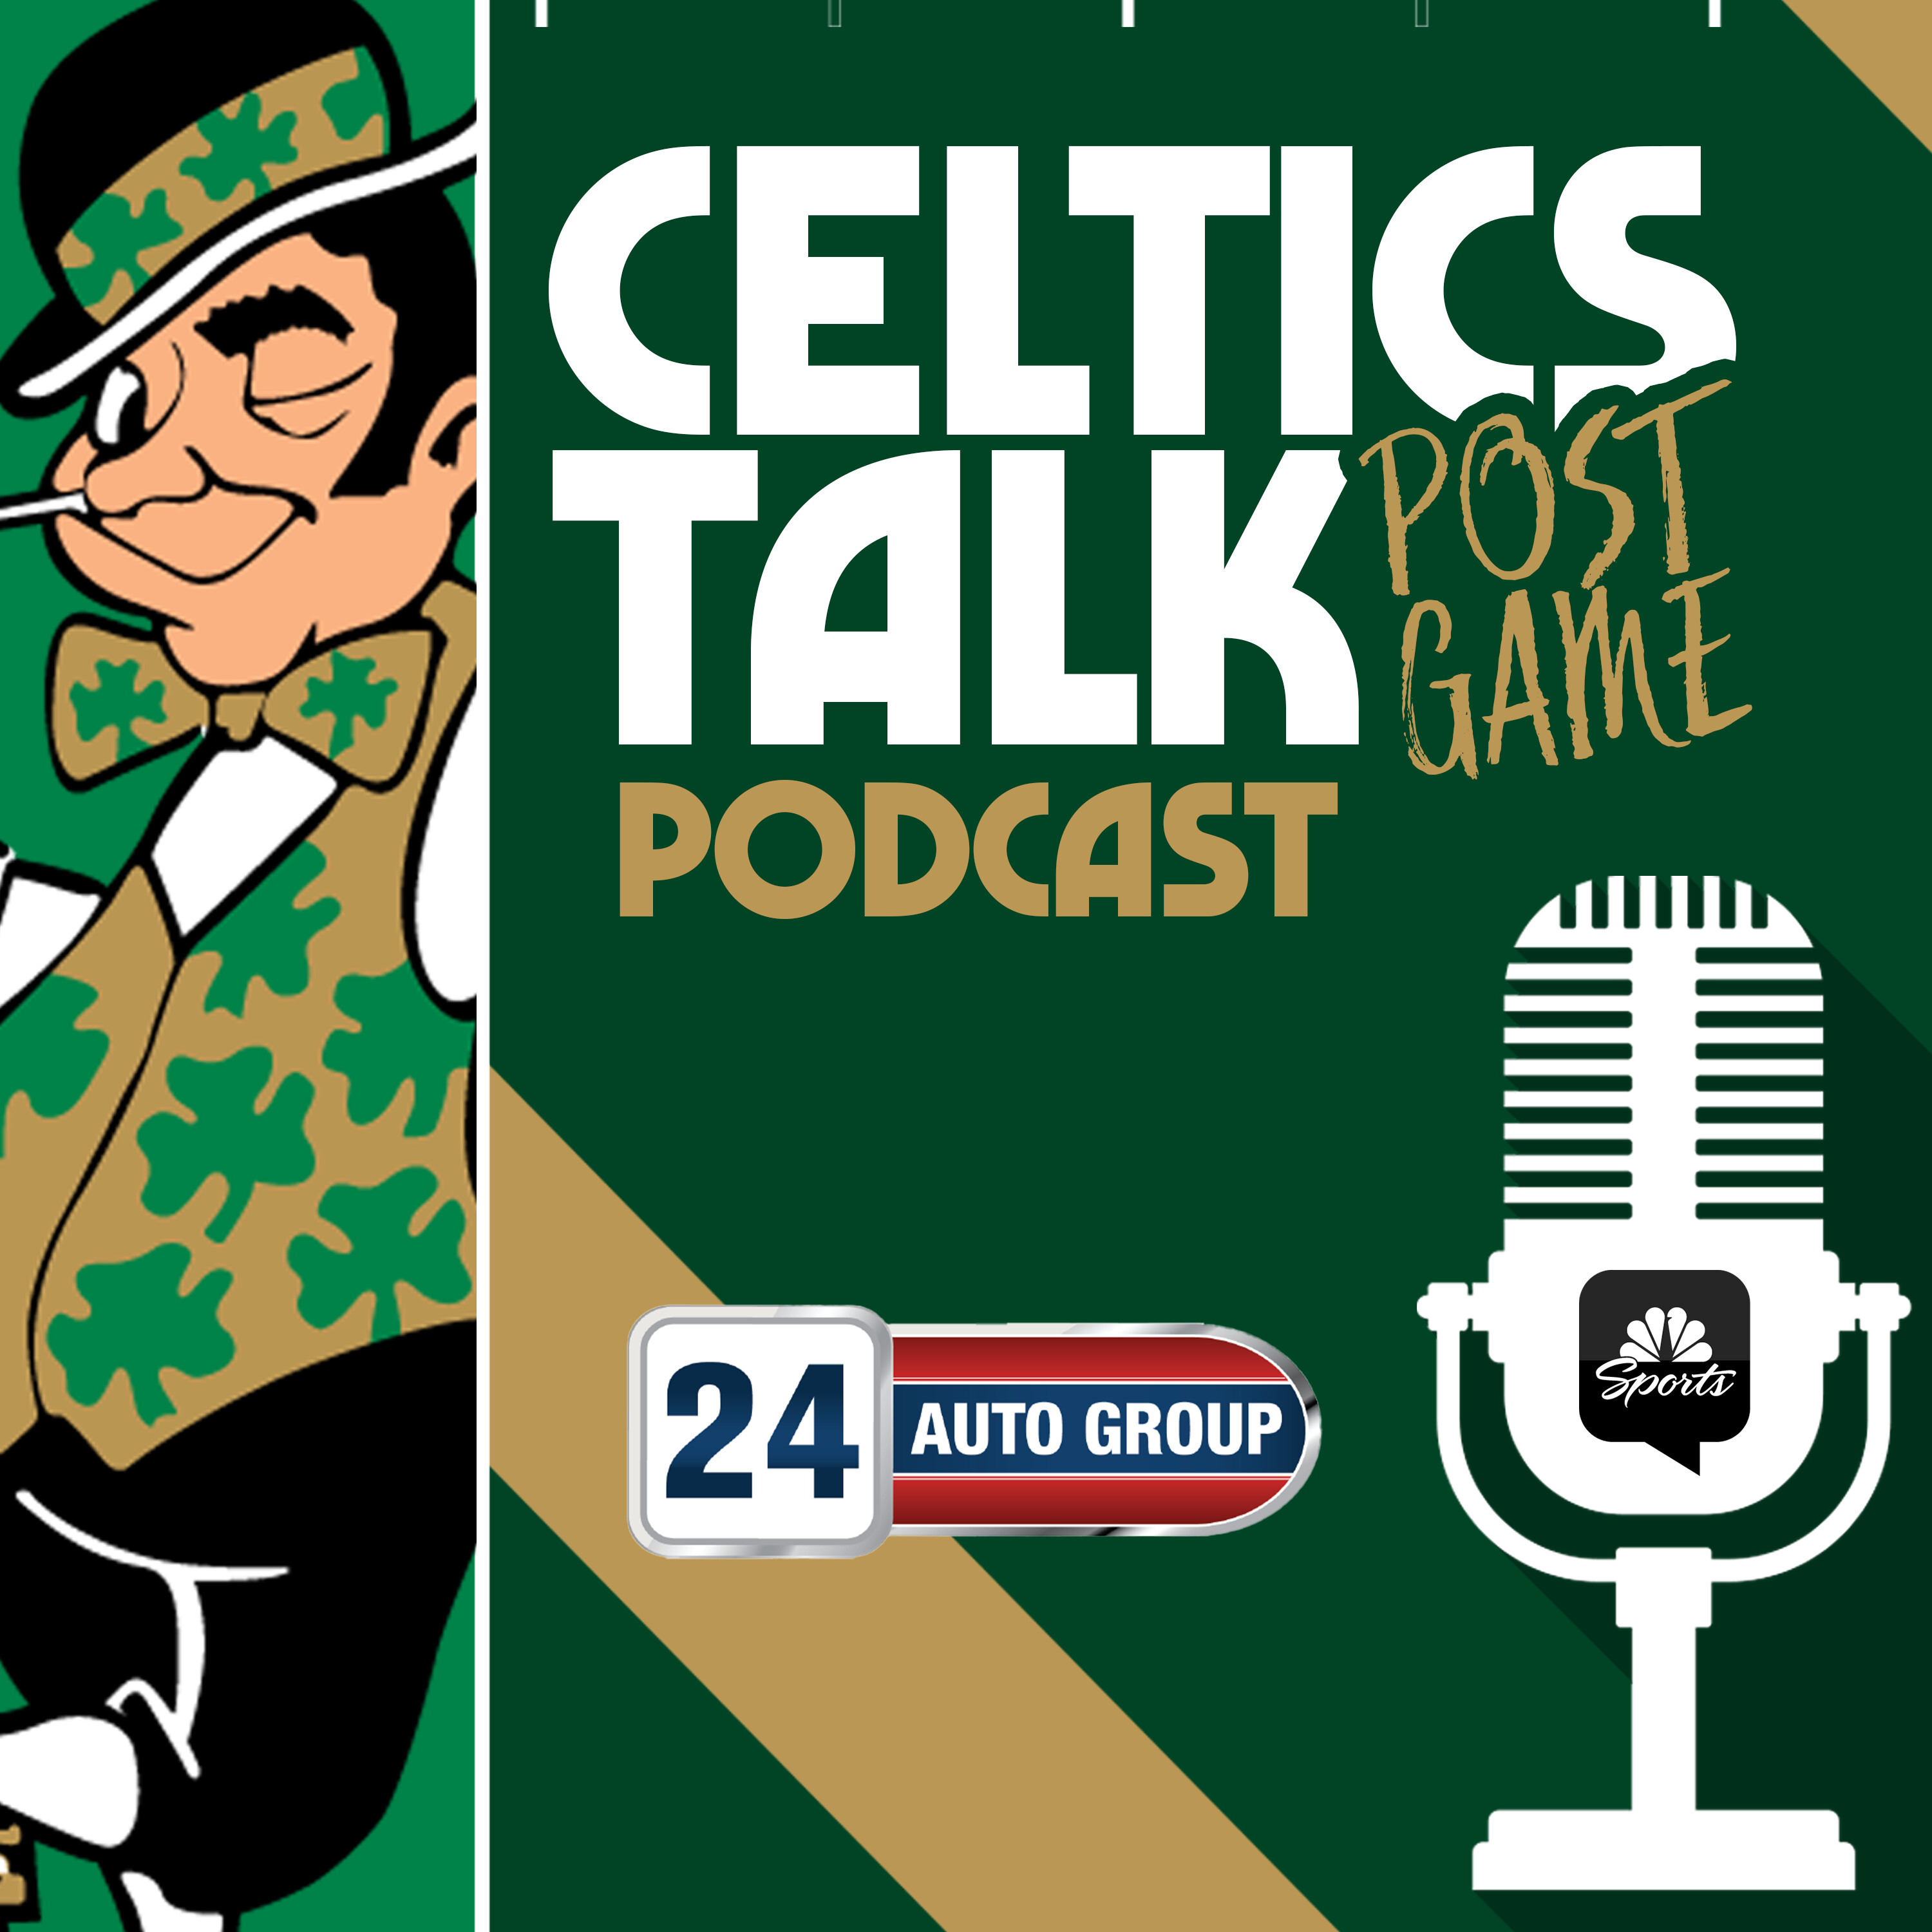 POSTGAME POD: Malcolm Brogdon plays key role in Celtics’ win over Wizards